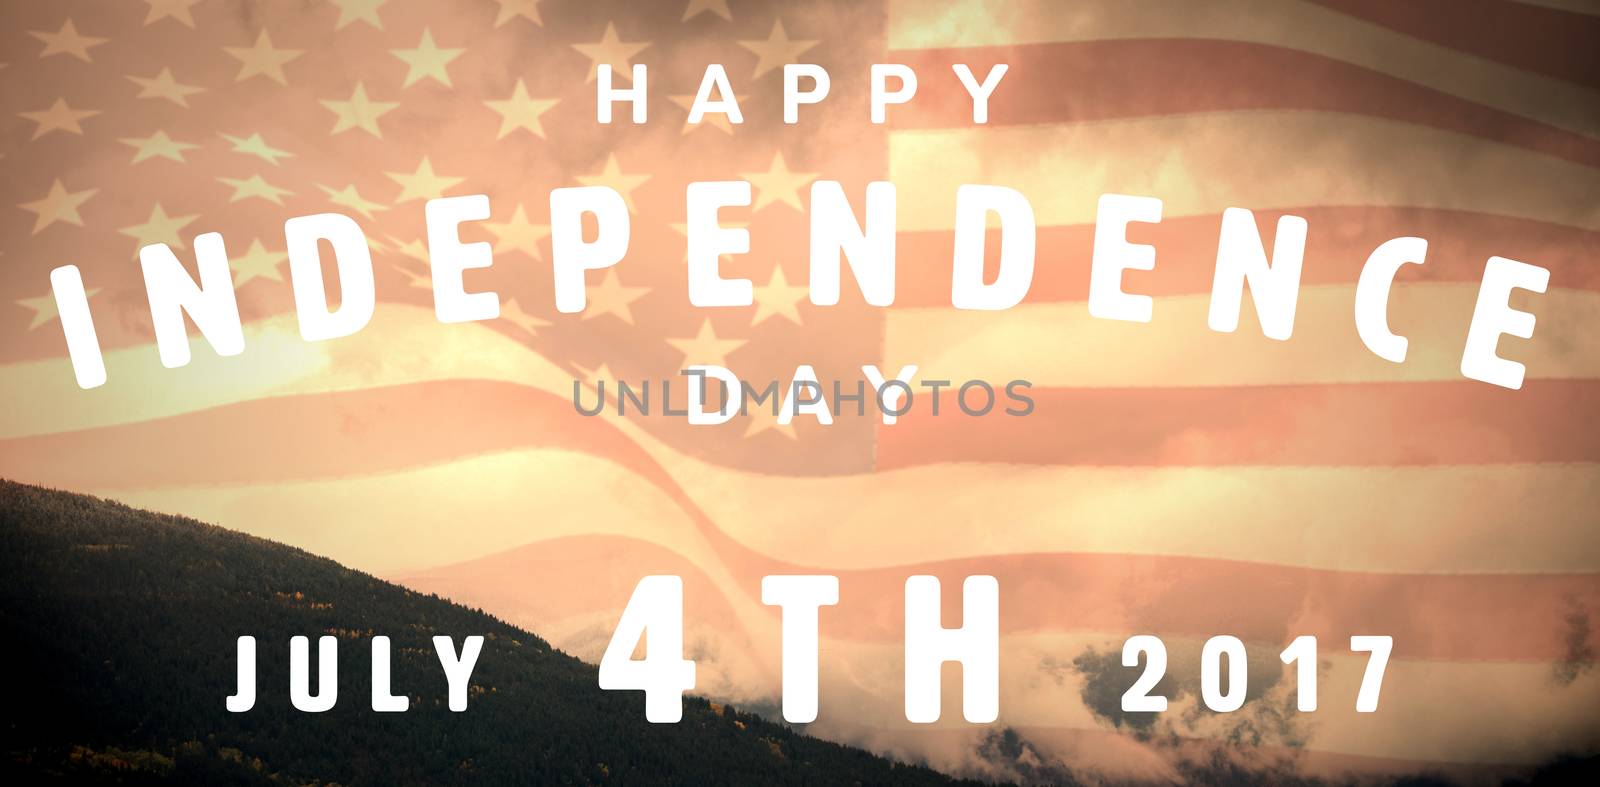 Happy 4th of july text on white background against view of mountain and cloudy sky